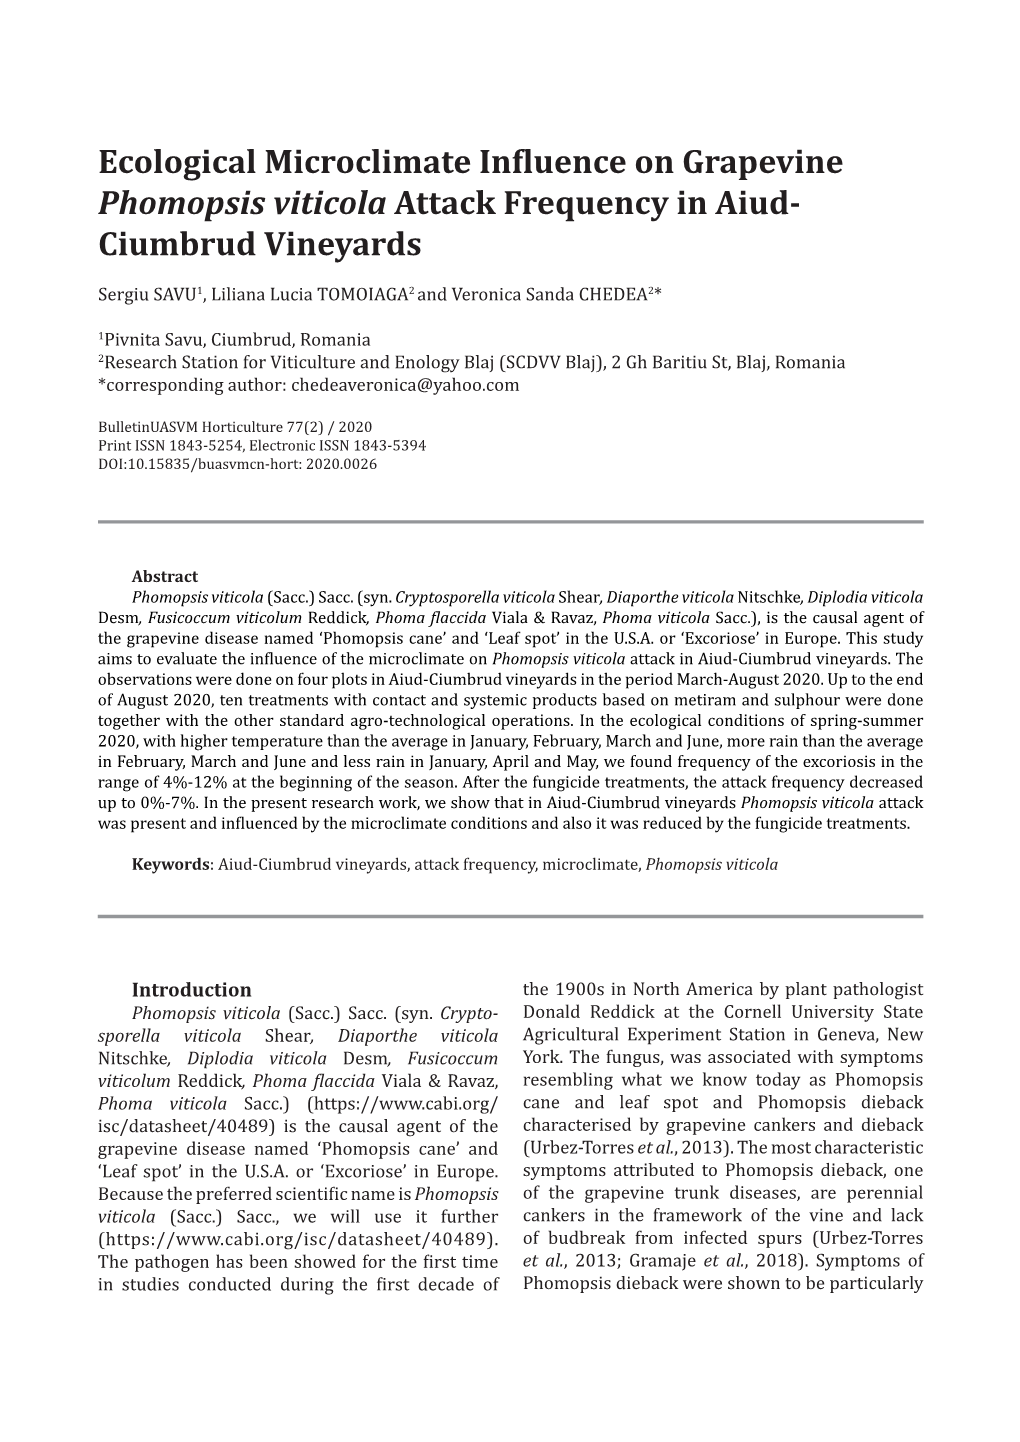 Ecological Microclimate Influence on Grapevine Phomopsis Viticola Attack Frequency in Aiud- Ciumbrud Vineyards